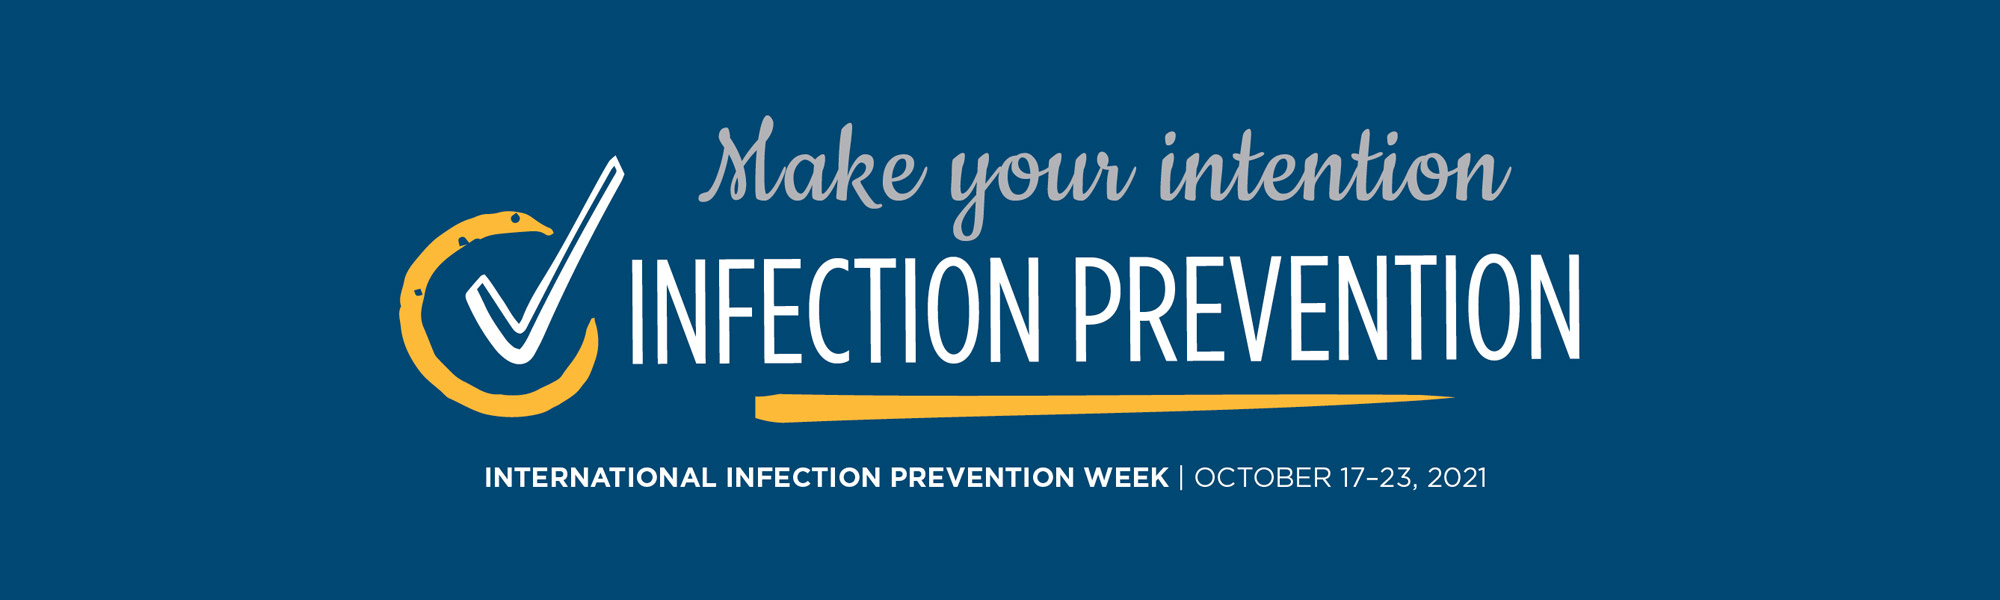 Infection Preventionists See Help With Infection Control From Federal Funding